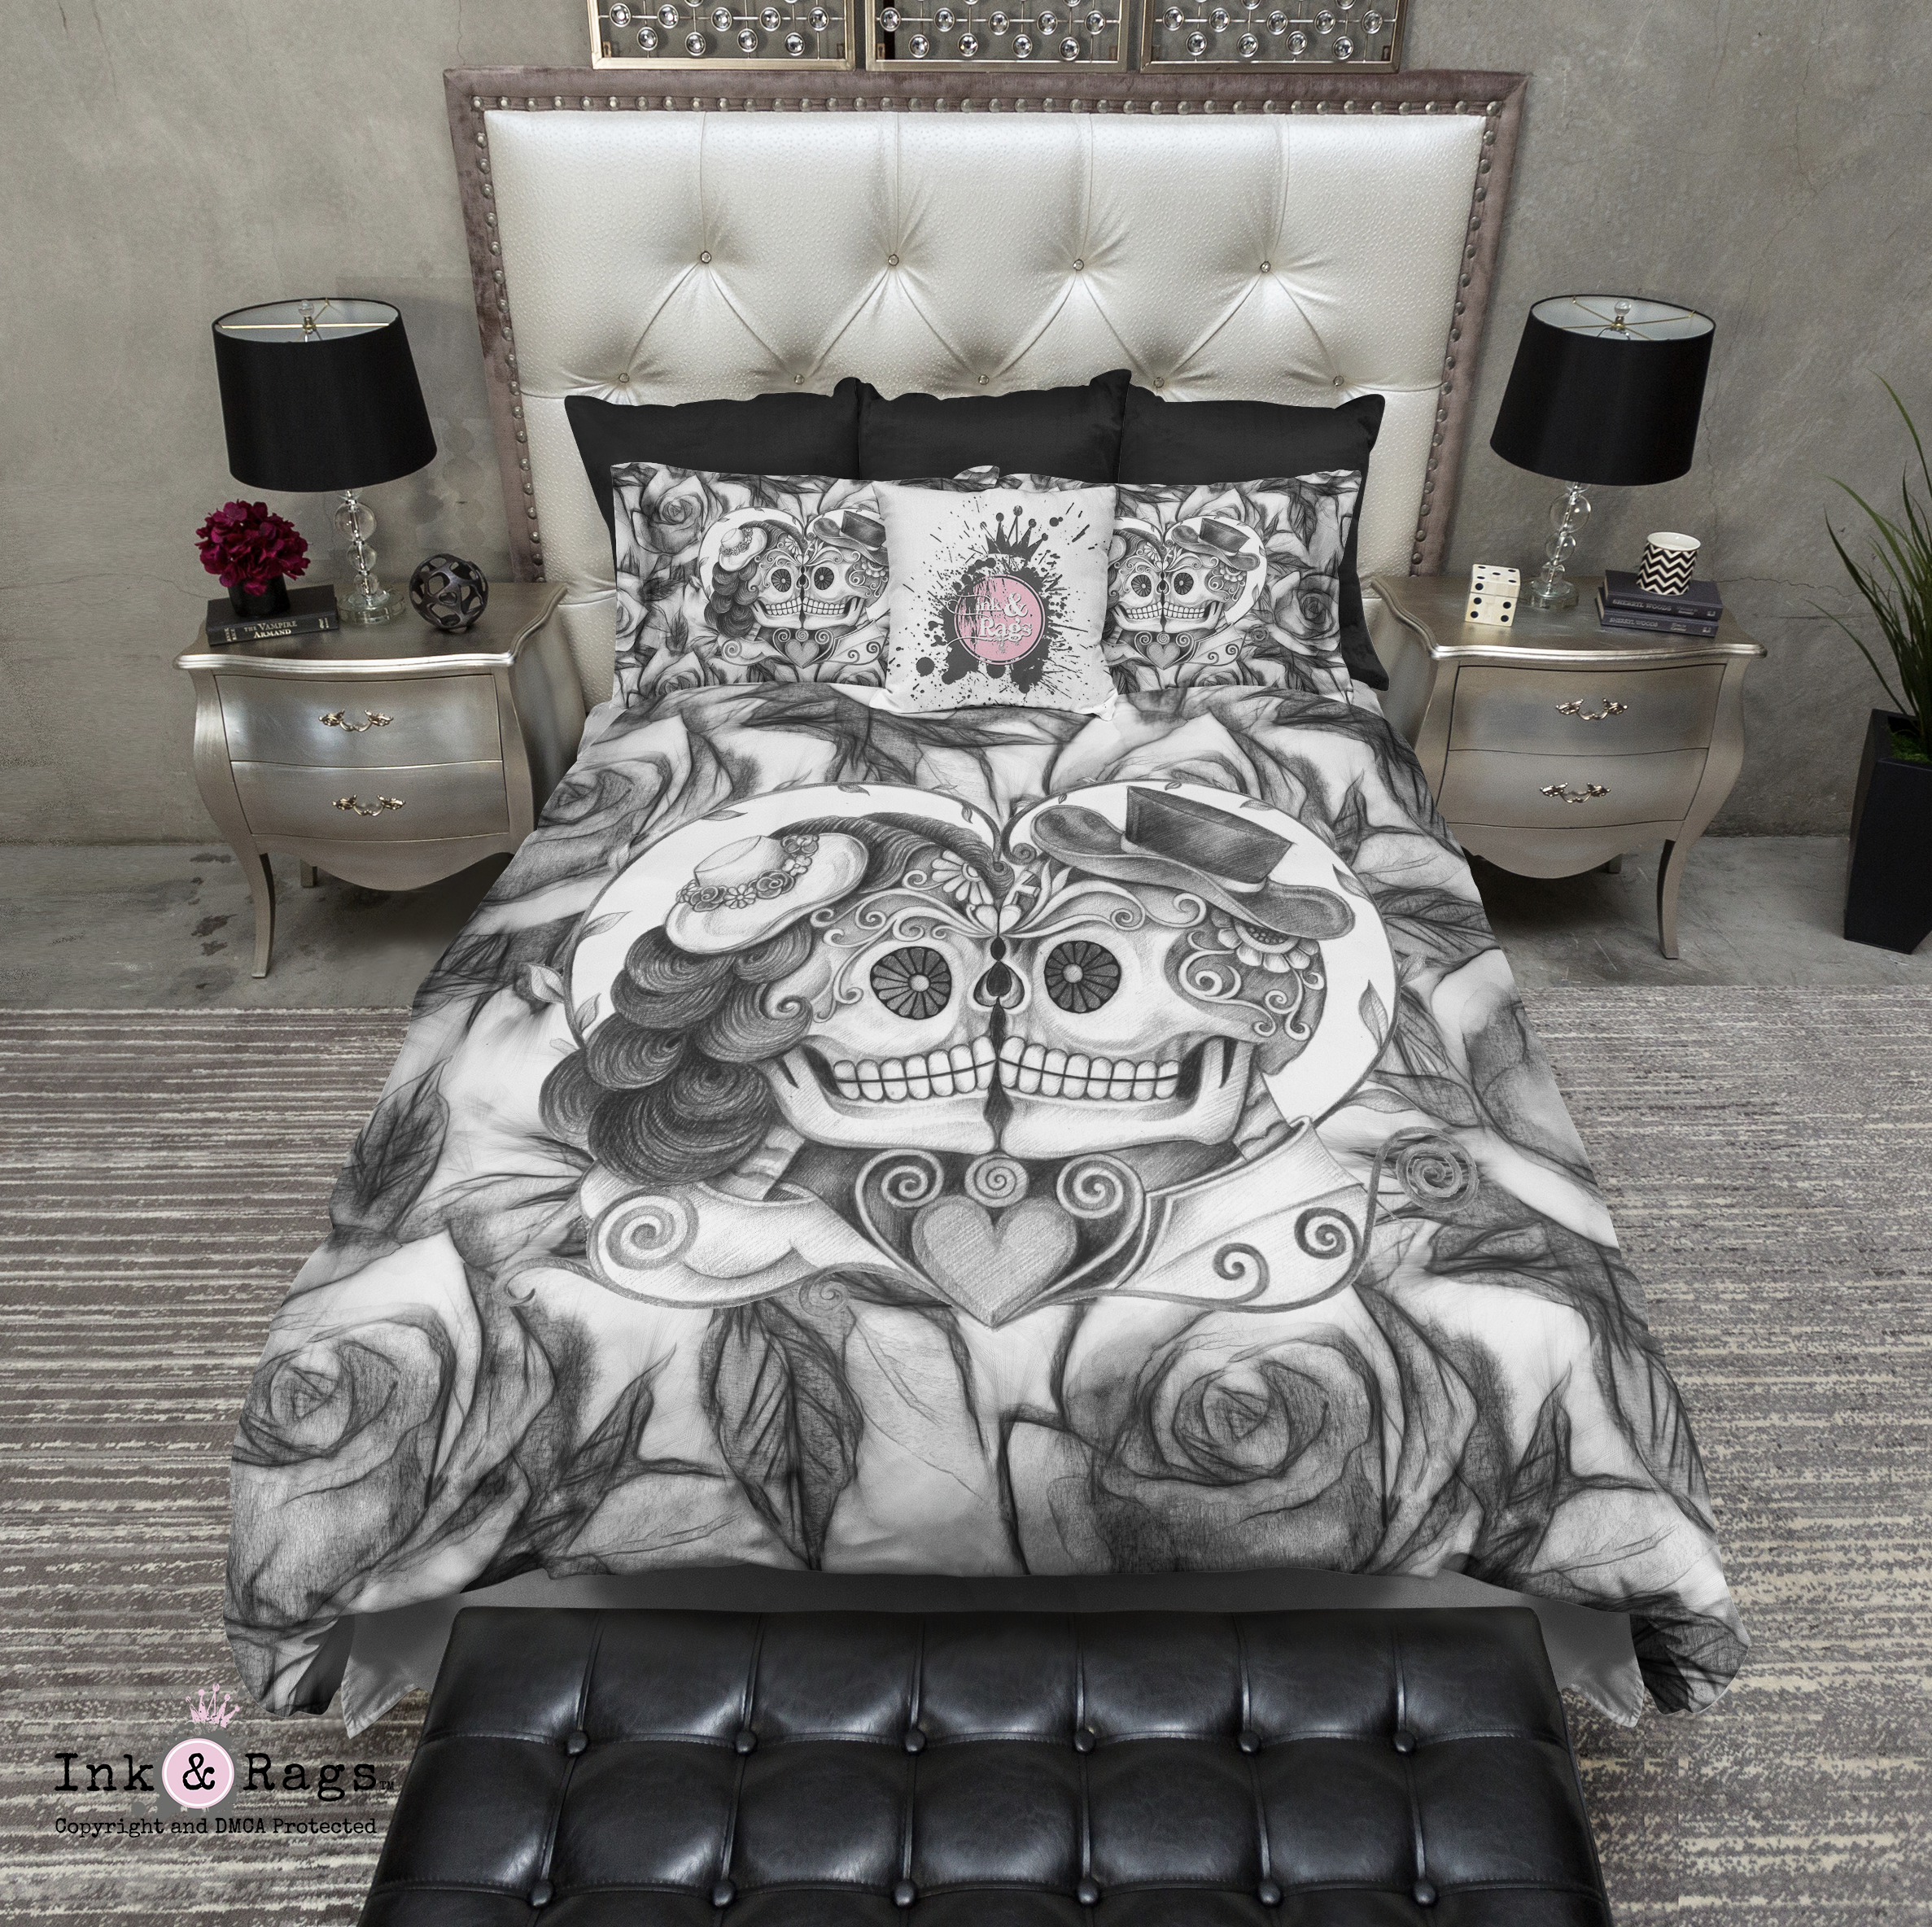 Pencil Sketch Rose Kissing Couple Sugar Skull Bedding Ink And Rags